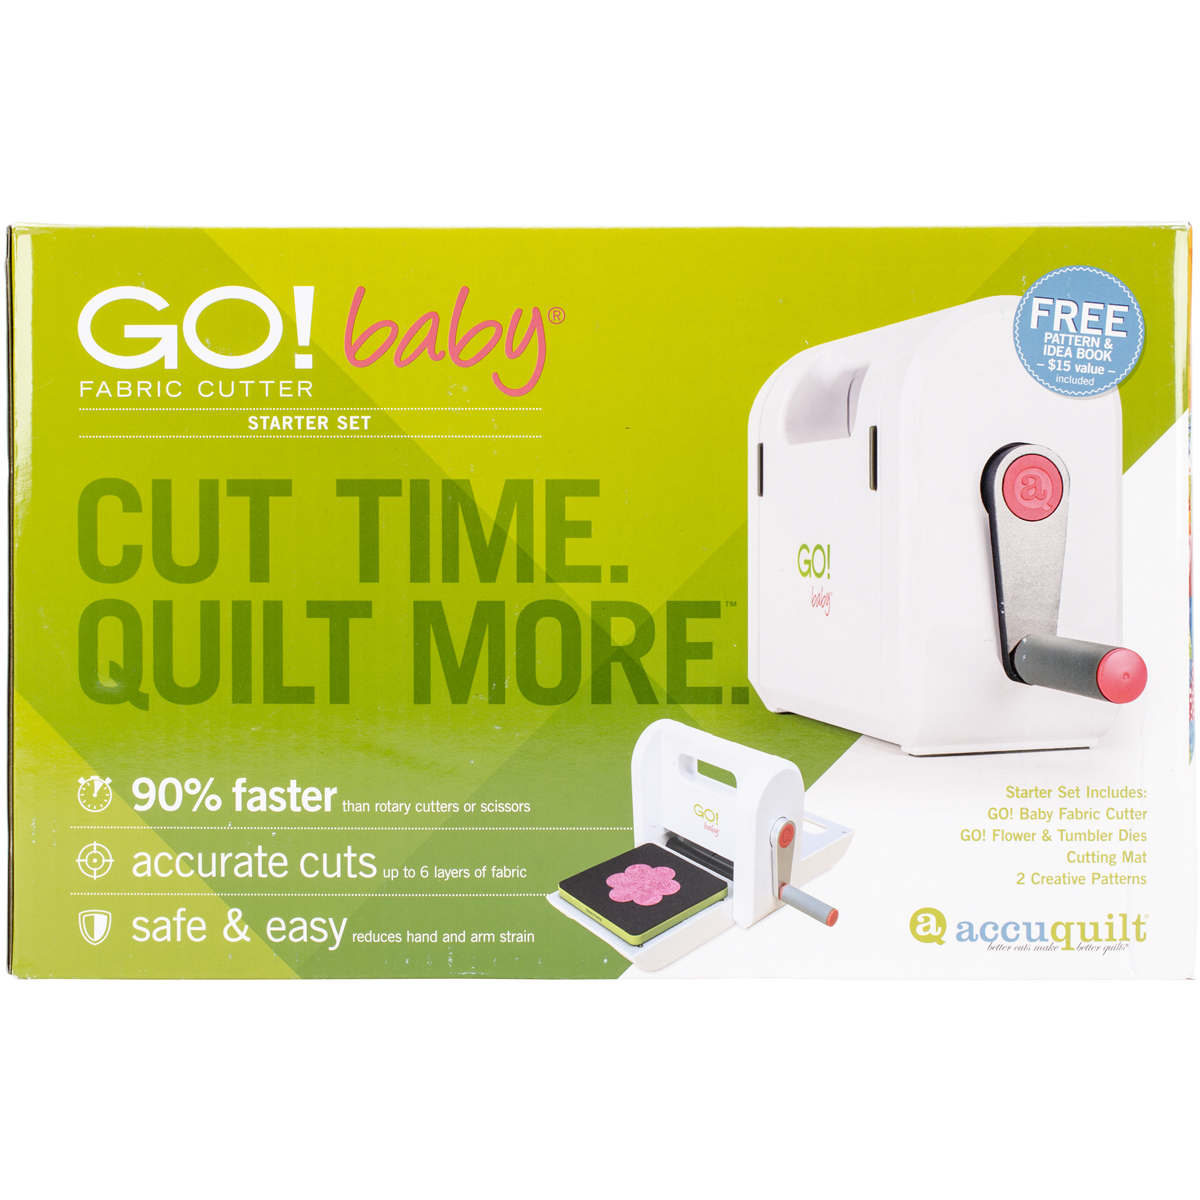 GO! Baby Fabric Cutter Starter Set-FOB: MI - image 1 of 3